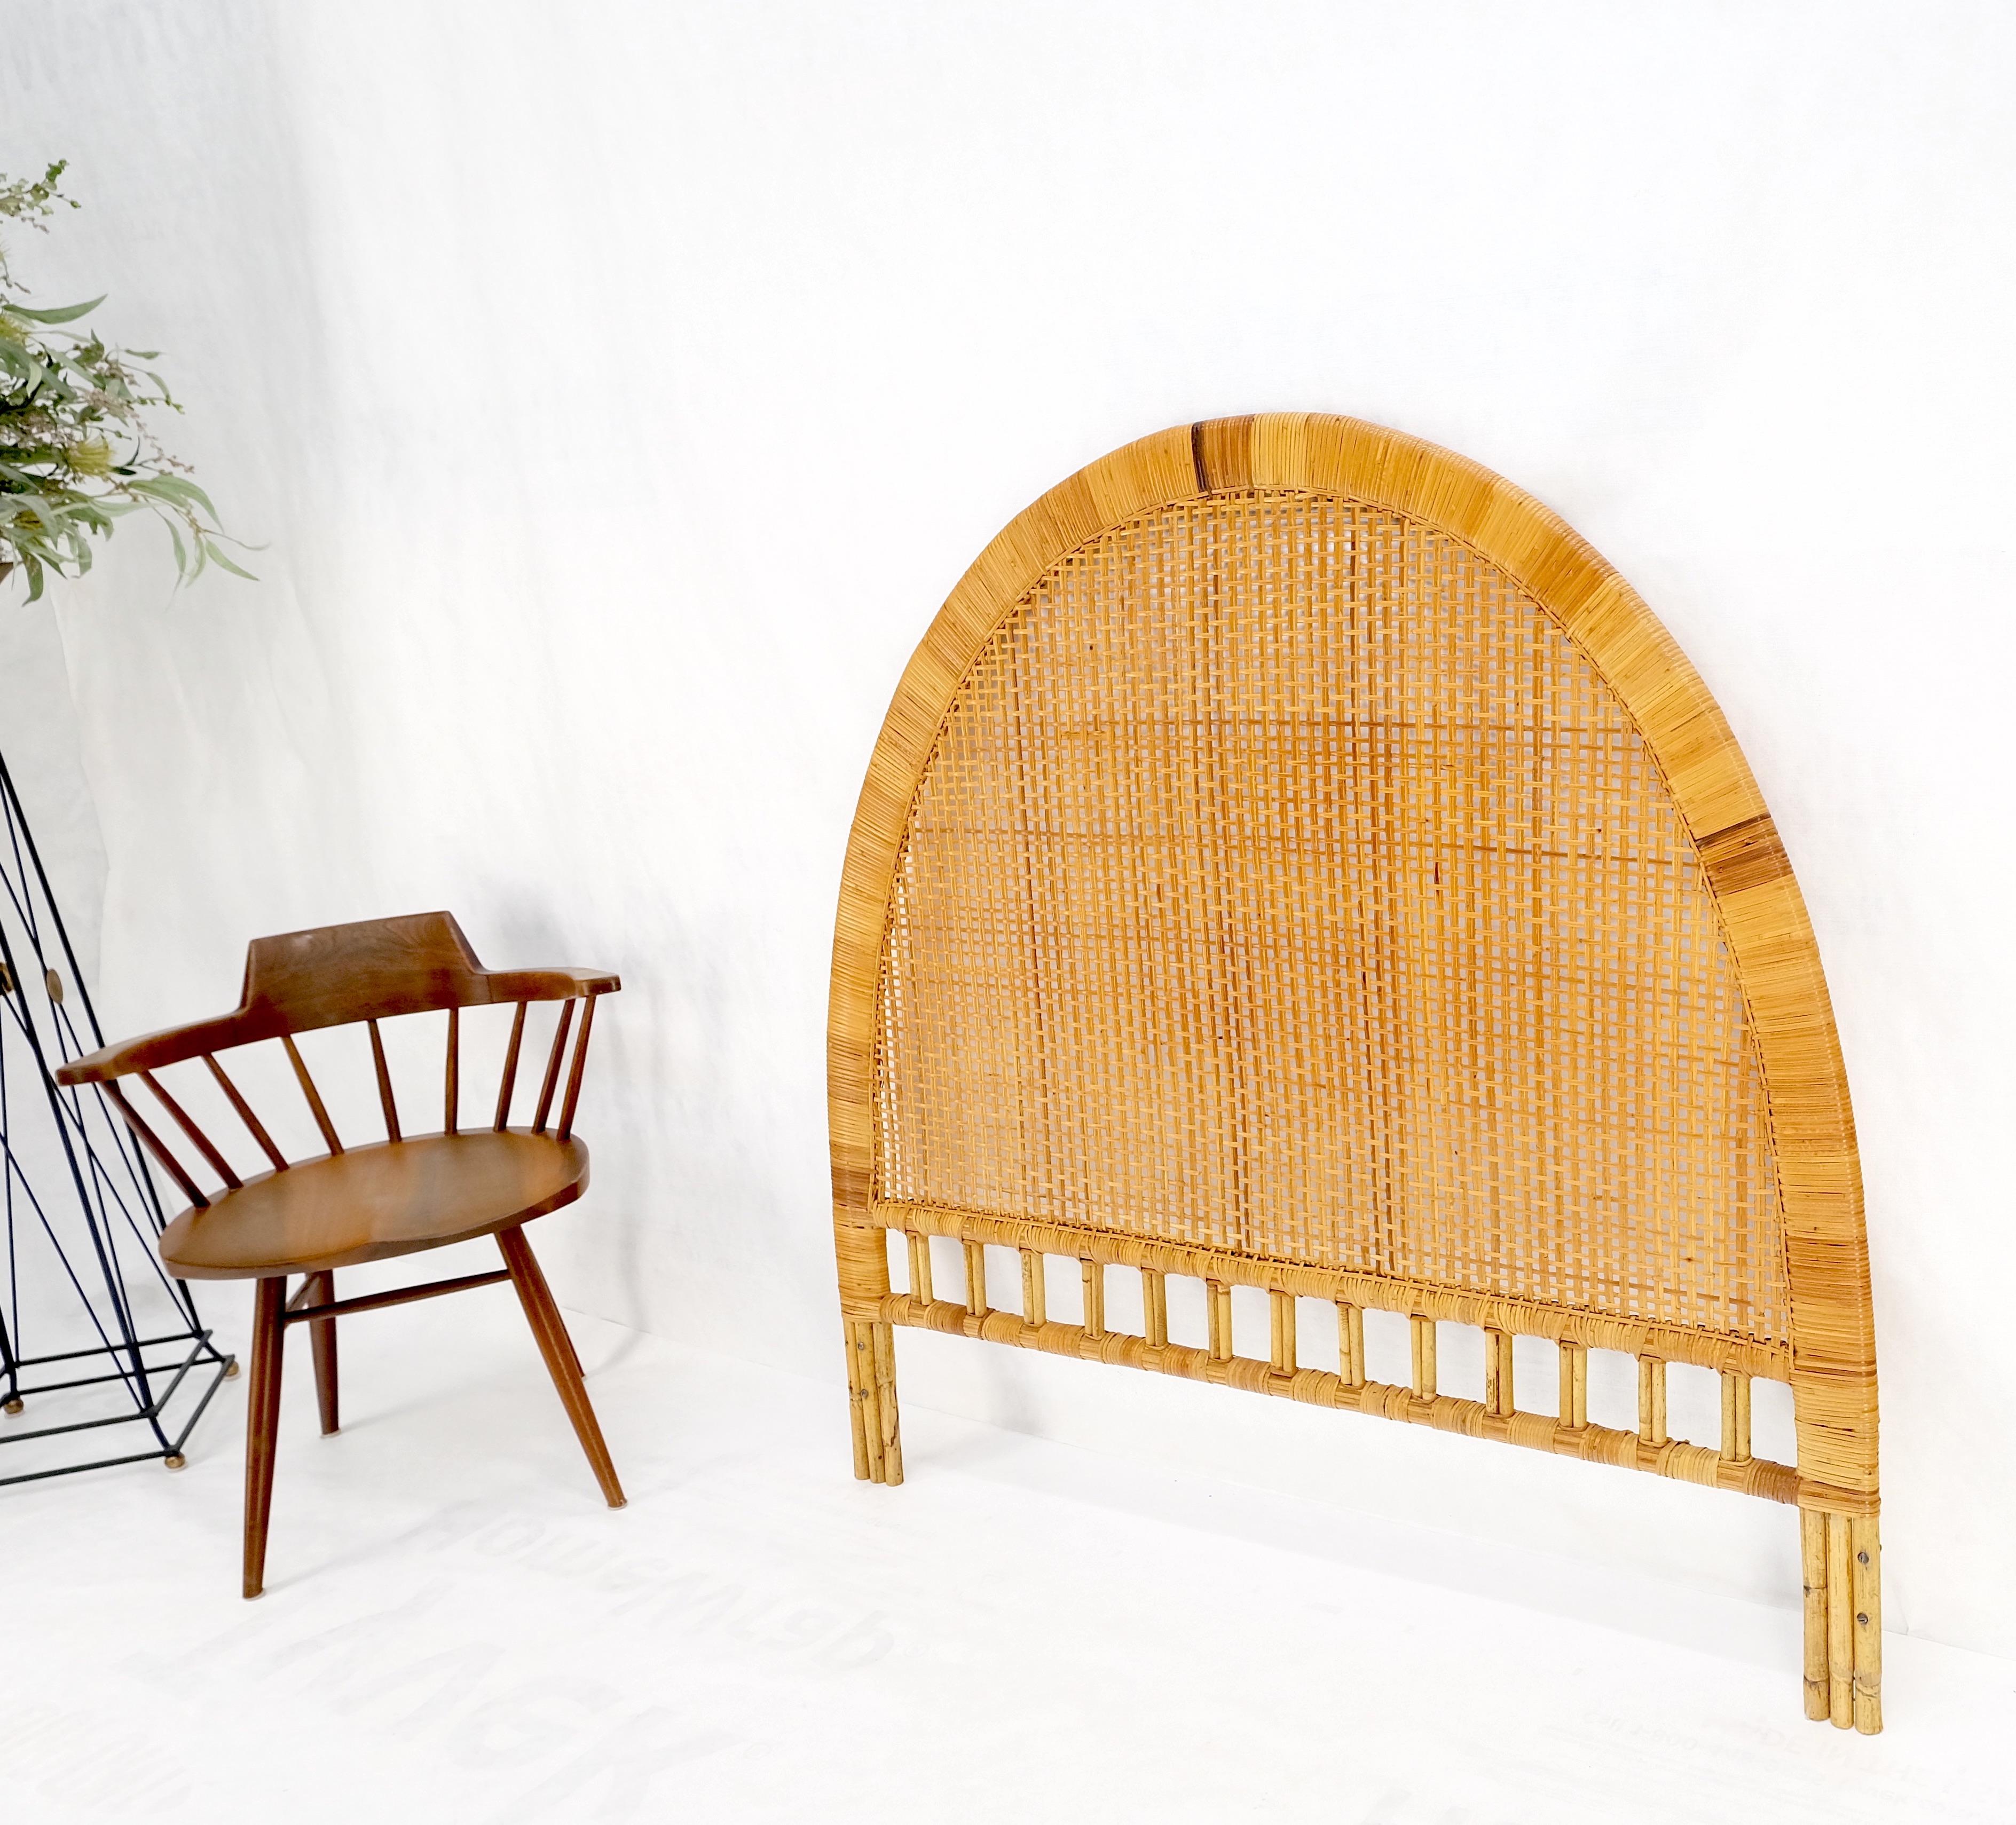 American Mid-Century Modern Rounded Shape Rattan Cane Headboard Bed Mint! For Sale